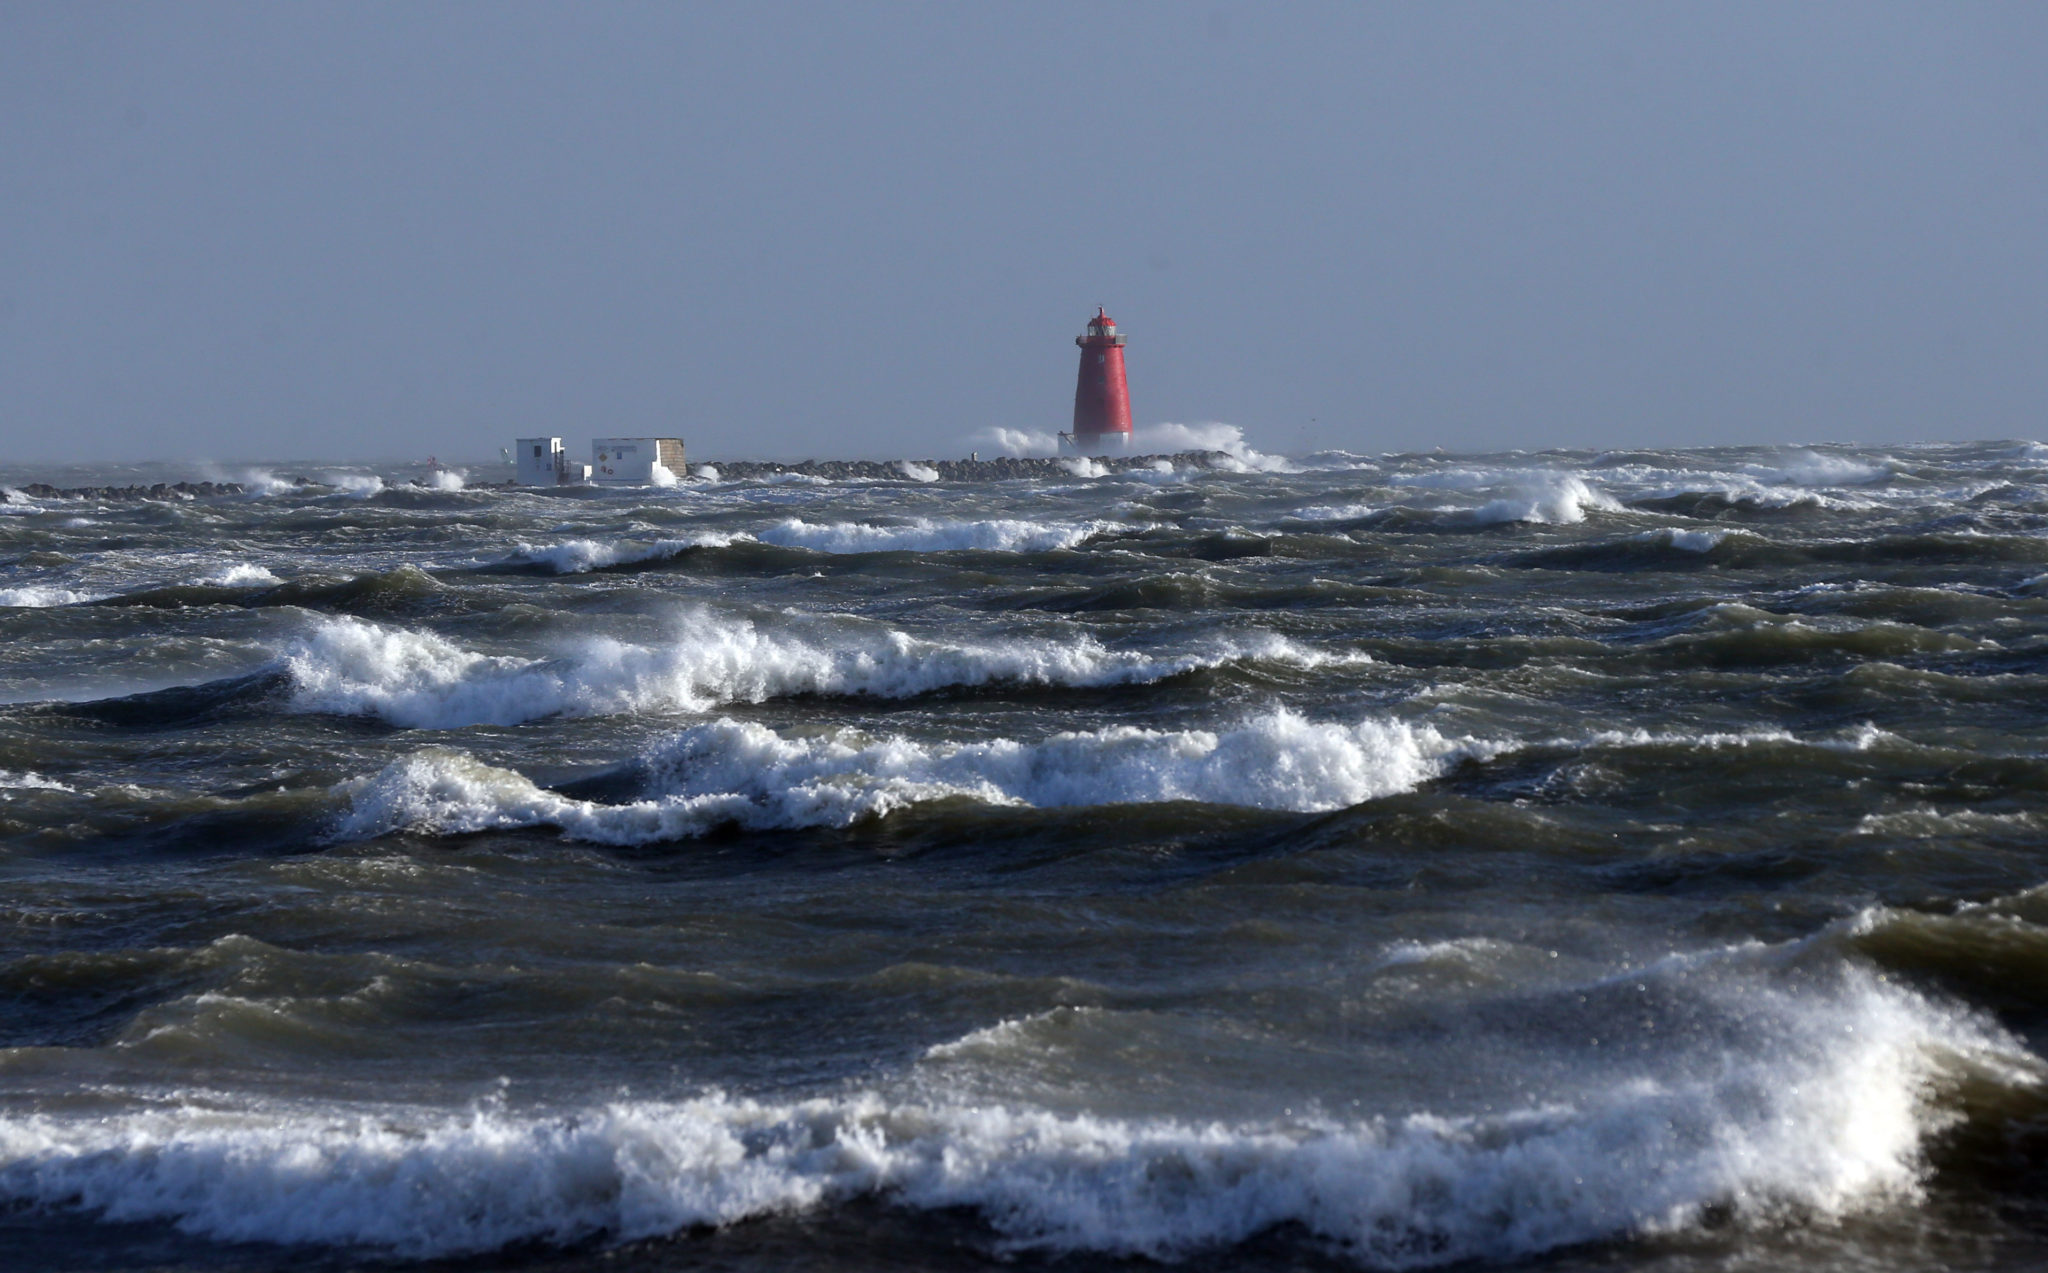 The Poolbeg lighthouse in Dublin is hit by rough waves